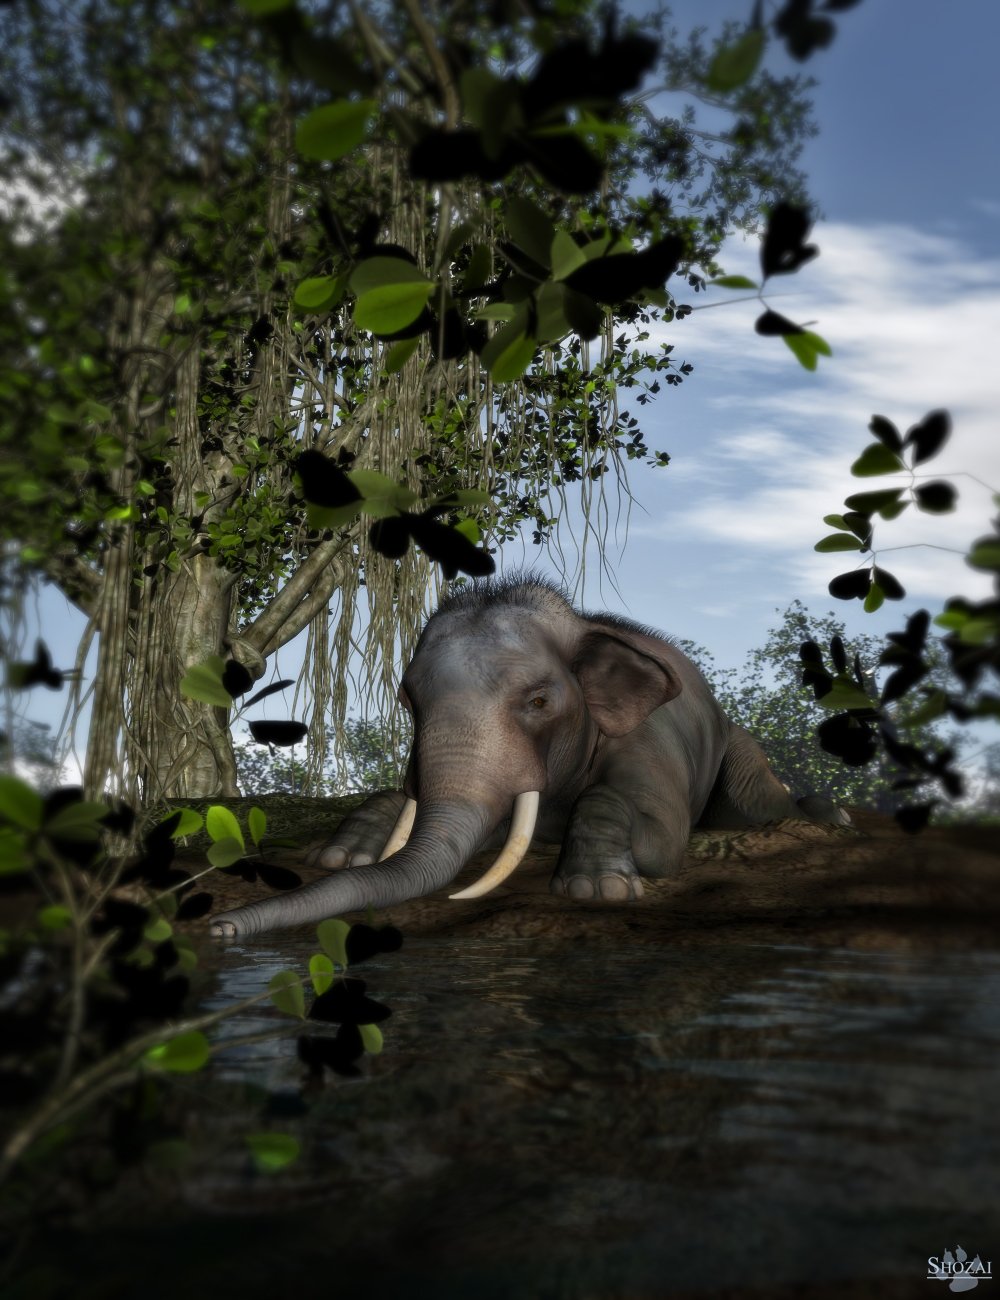 Indian Elephant for Poser by AM by: Alessandro_AM, 3D Models by Daz 3D